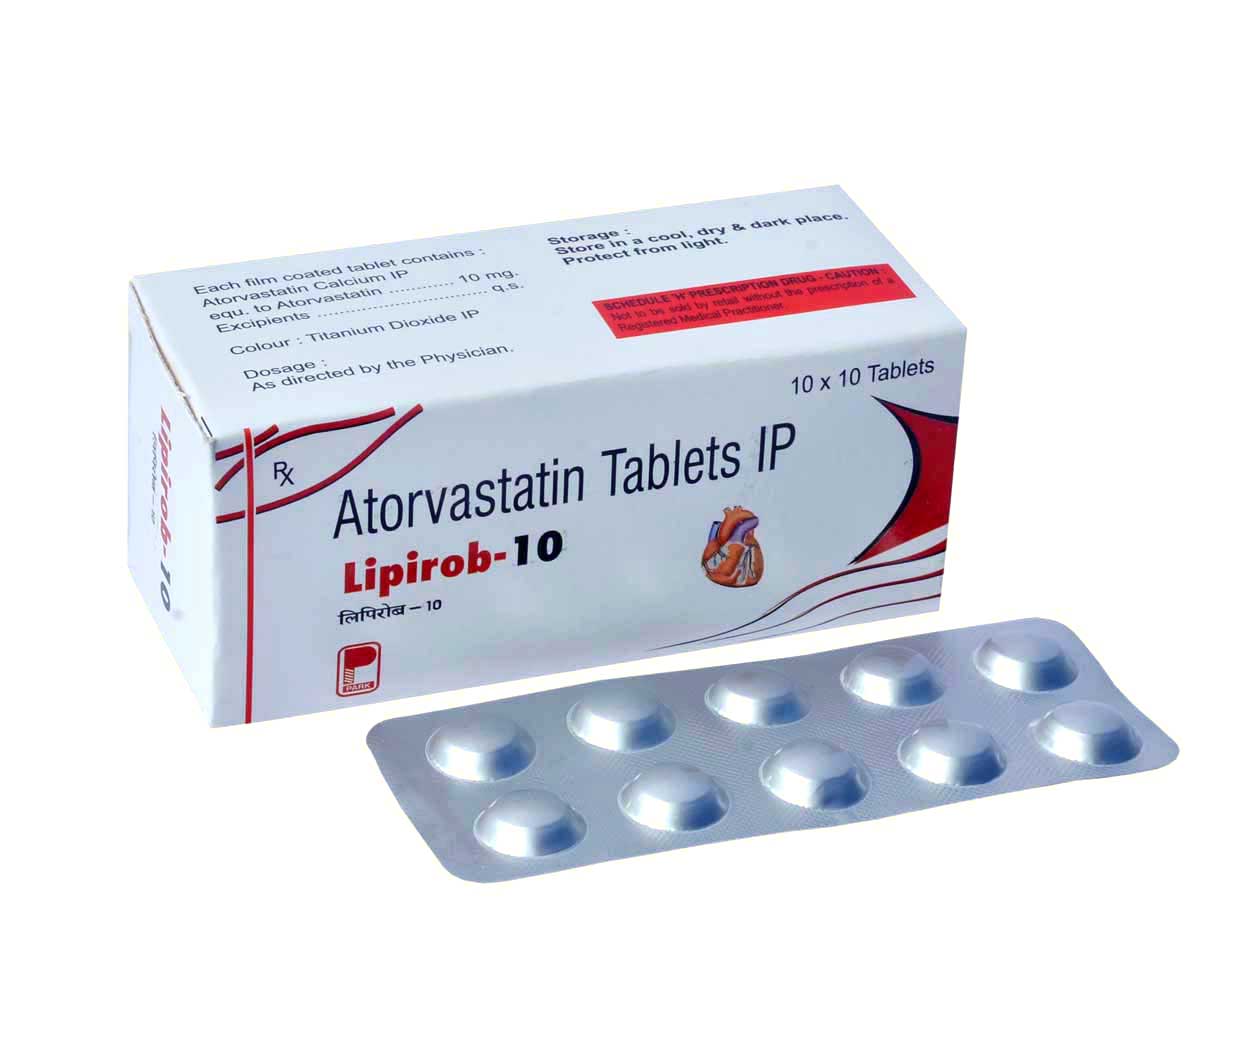 Product Name: Lipirob 10, Compositions of Lipirob 10 are Atorvastatin Tablets IP - Park Pharmaceuticals